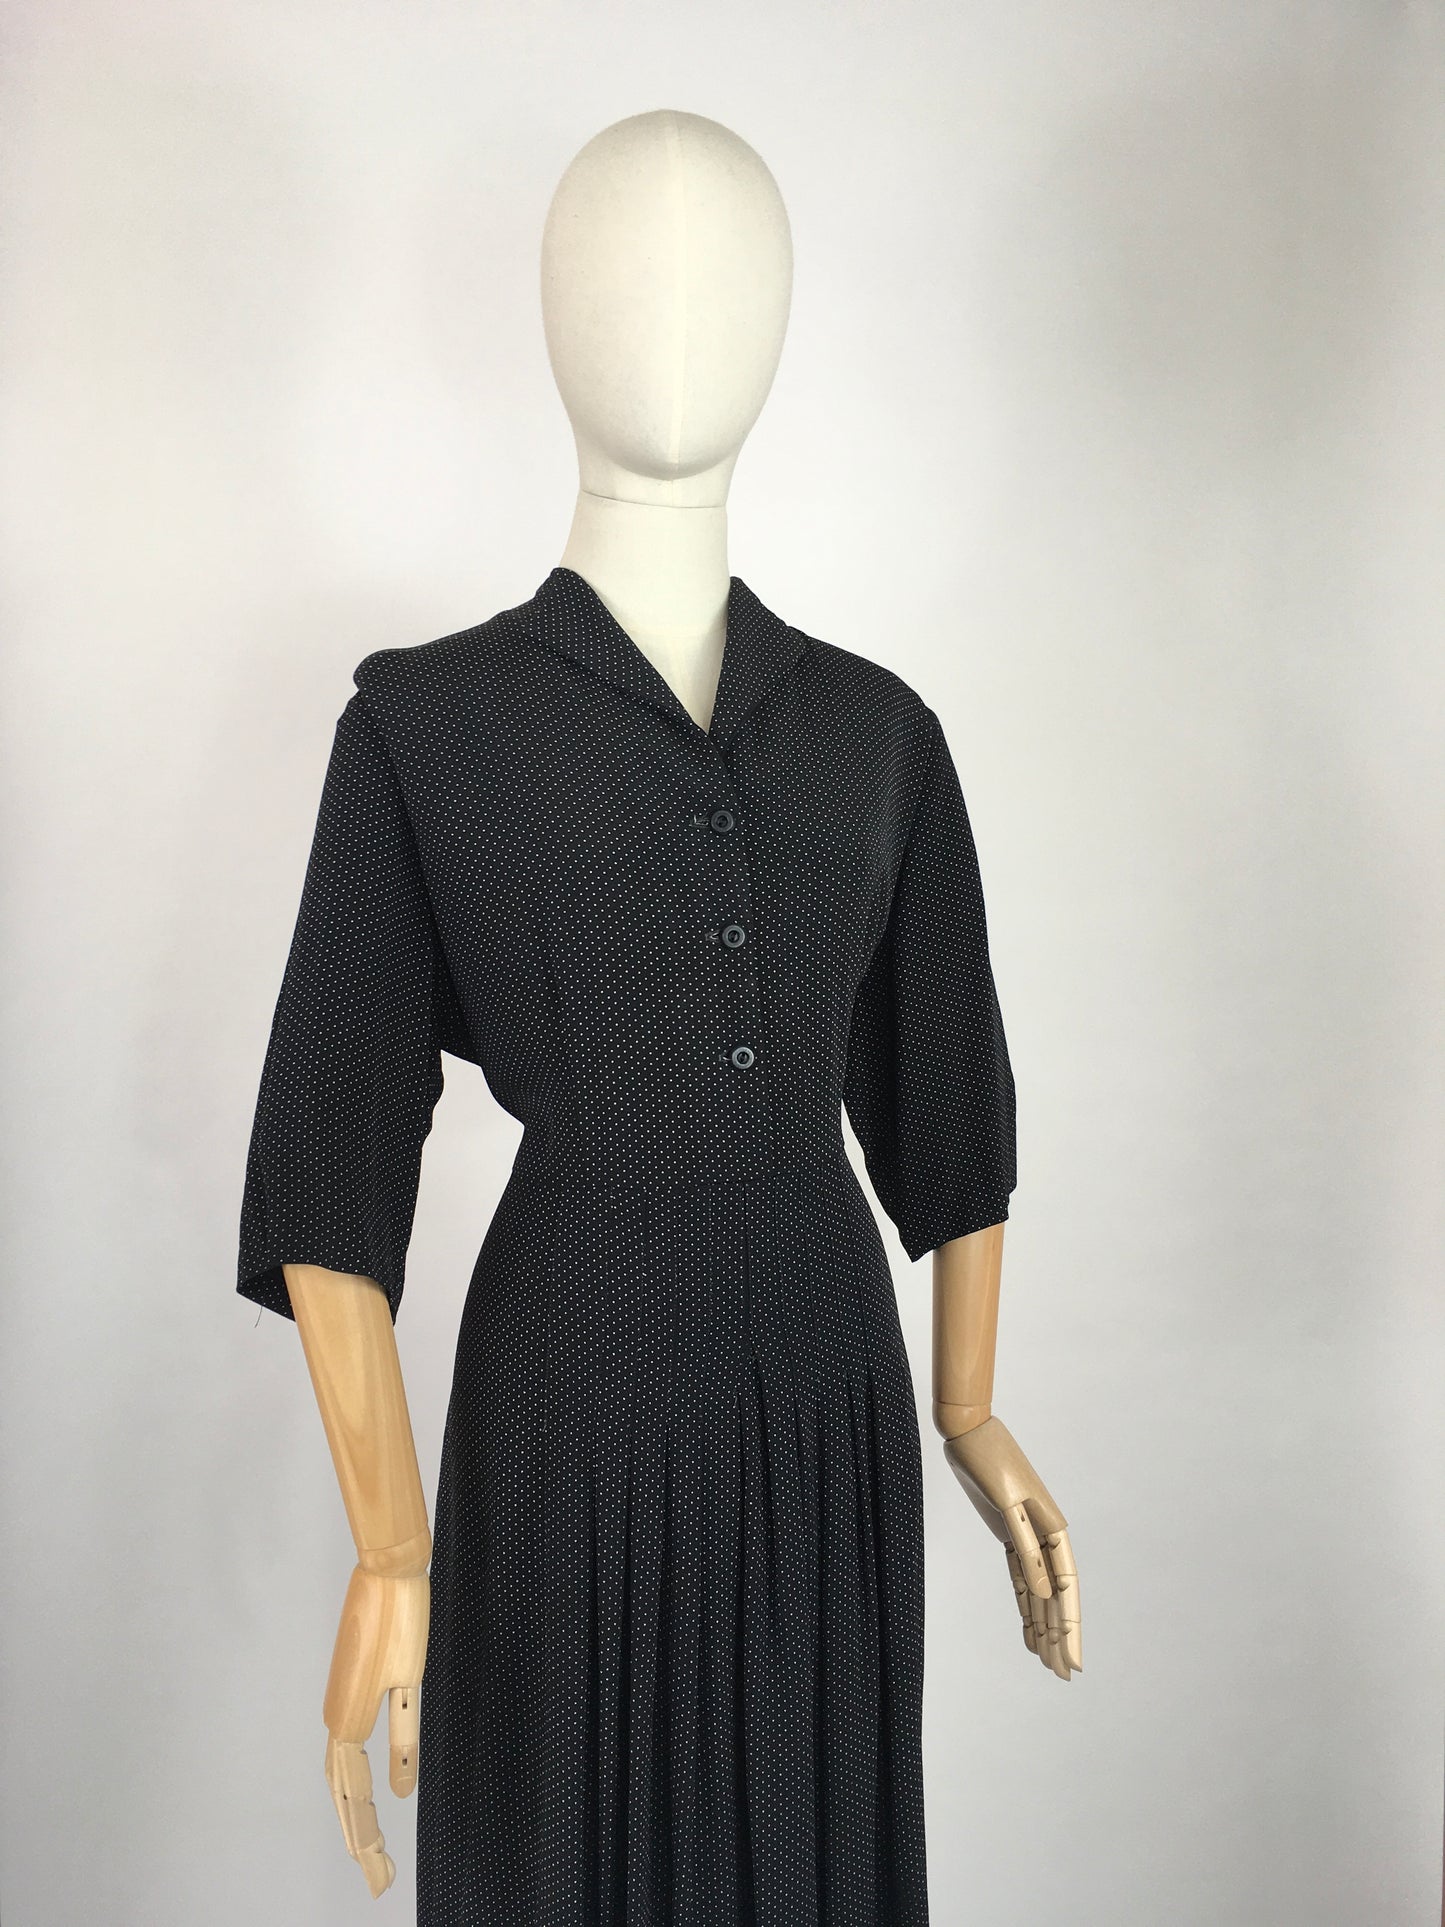 Original 1940’s VOLUP Day Dress - In a Beautifully Classic Black and White Polka Dot Cotton